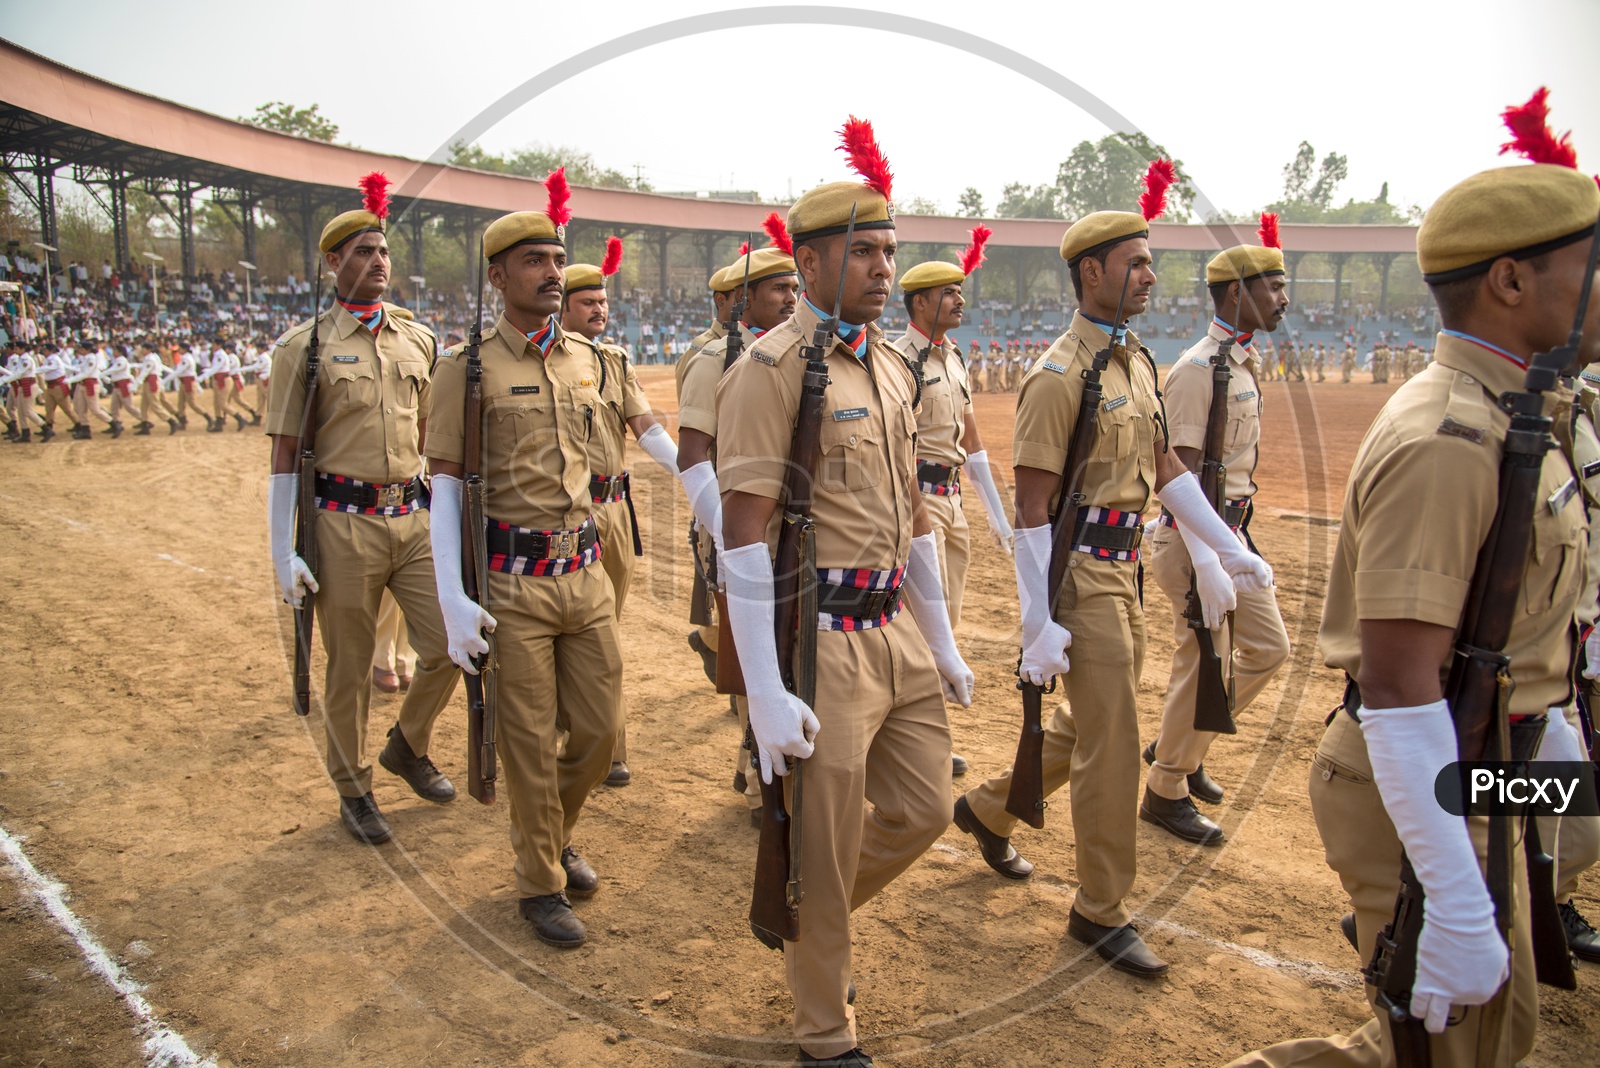 Maharashtra Cadet  Police Marching in Independence Day Parade